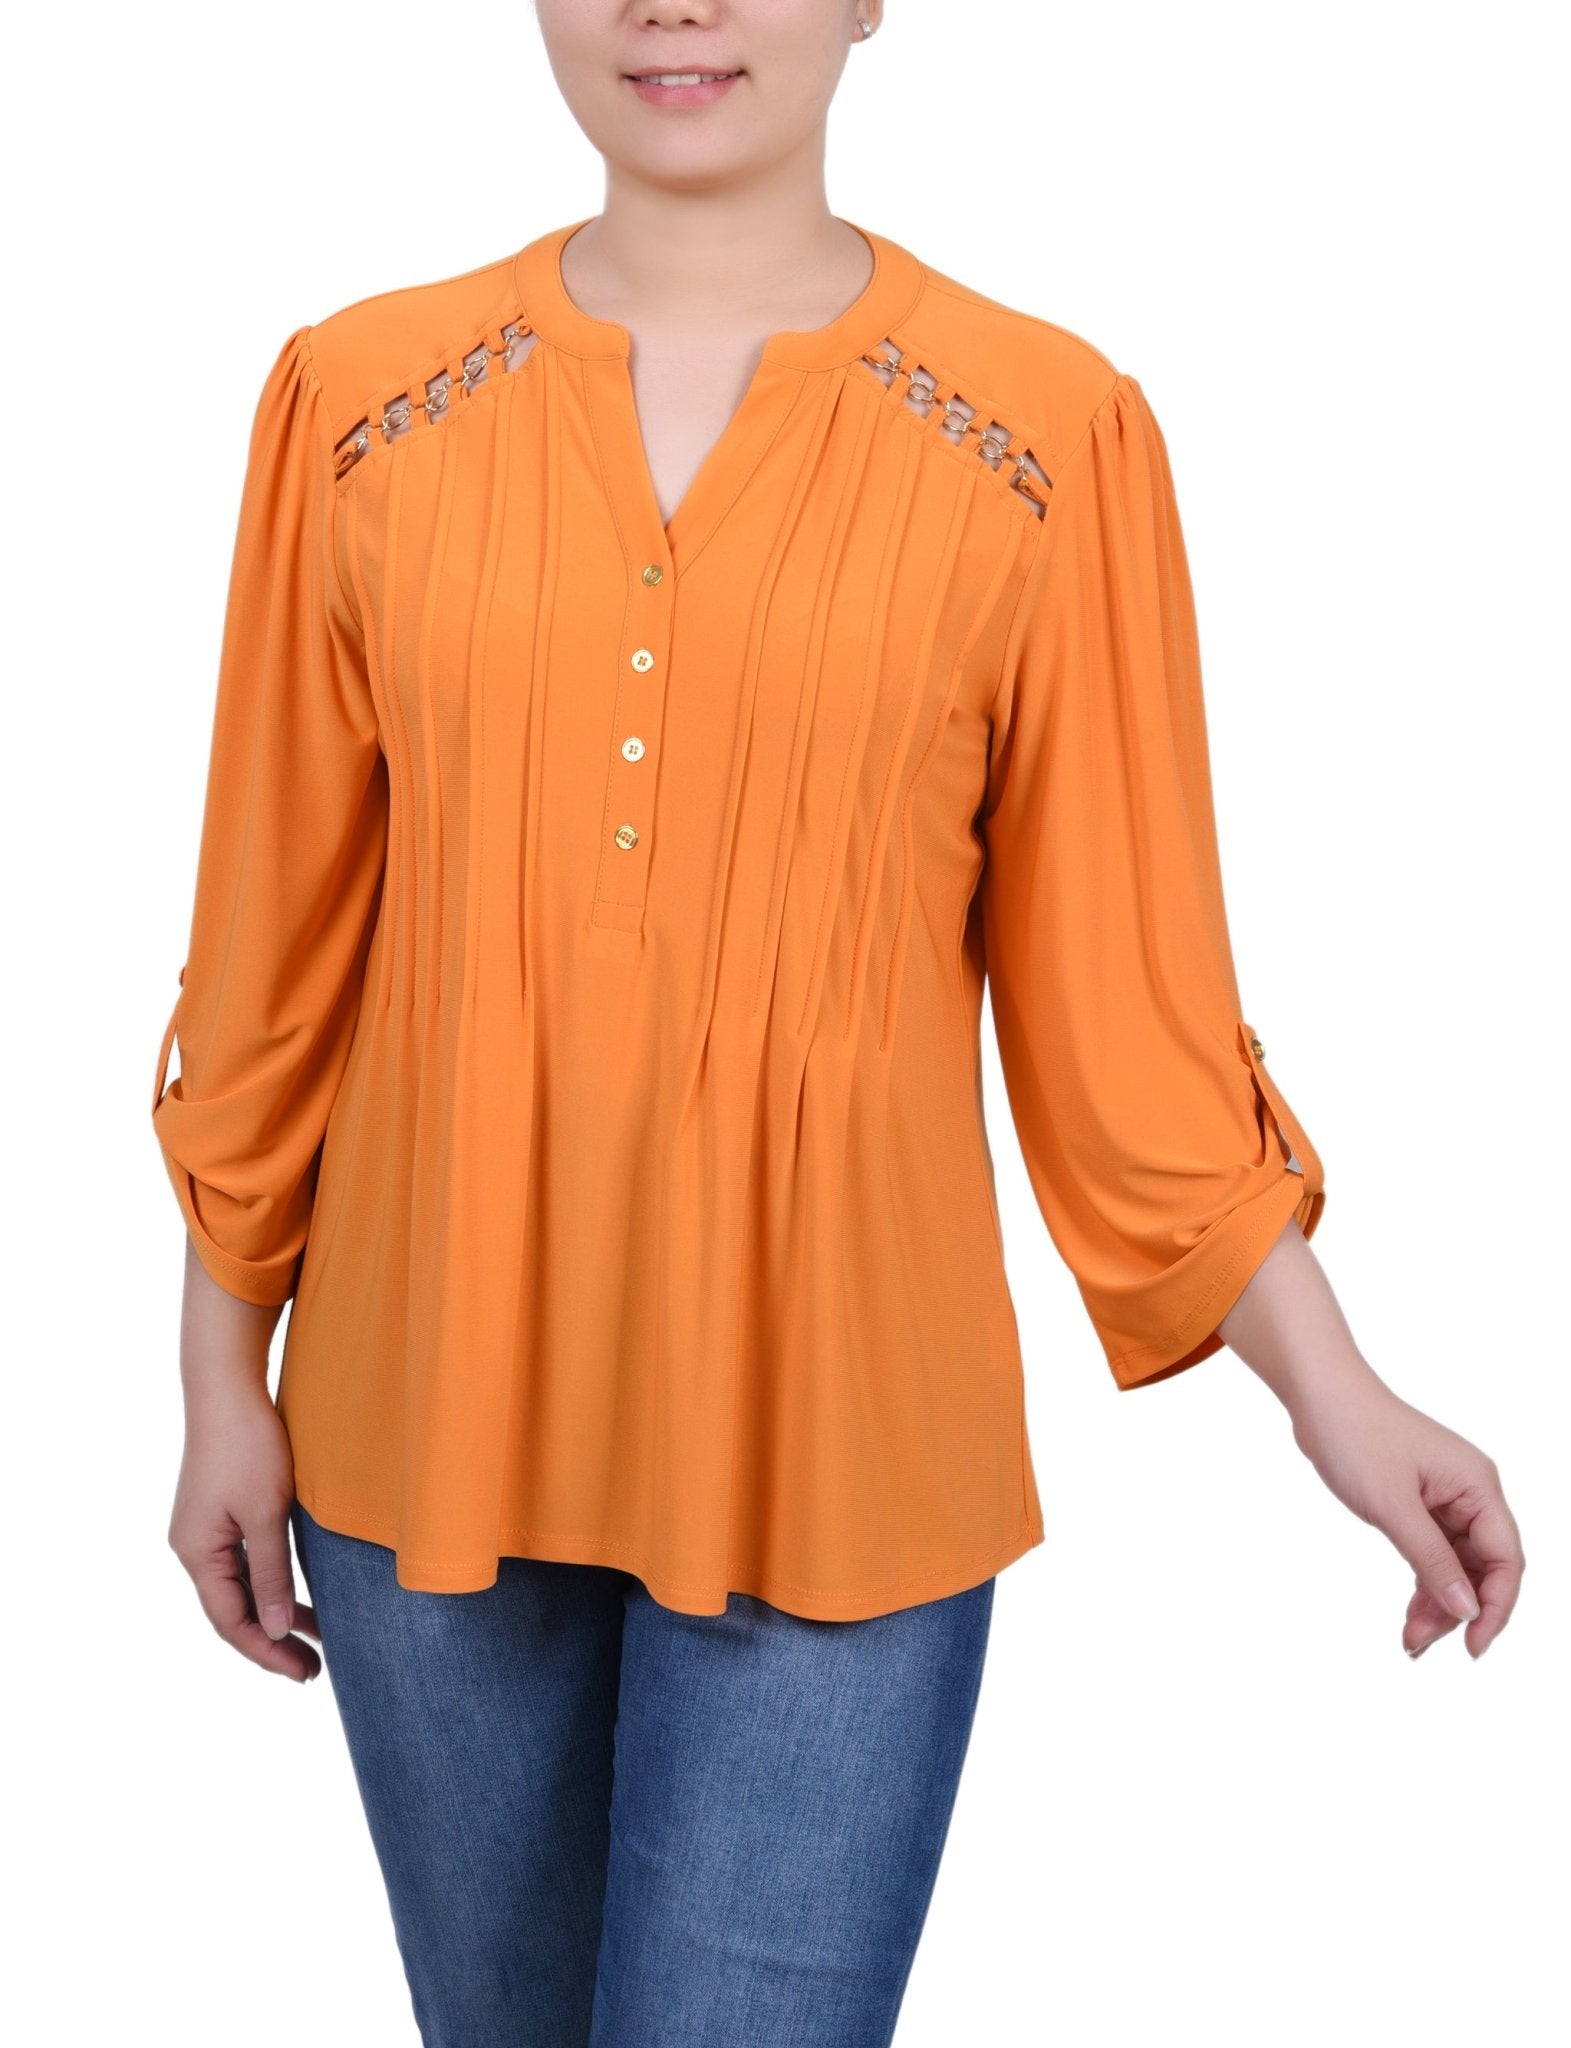 Pintuck Front Top With Chain Details - Petite - DressbarnShirts & Blouses